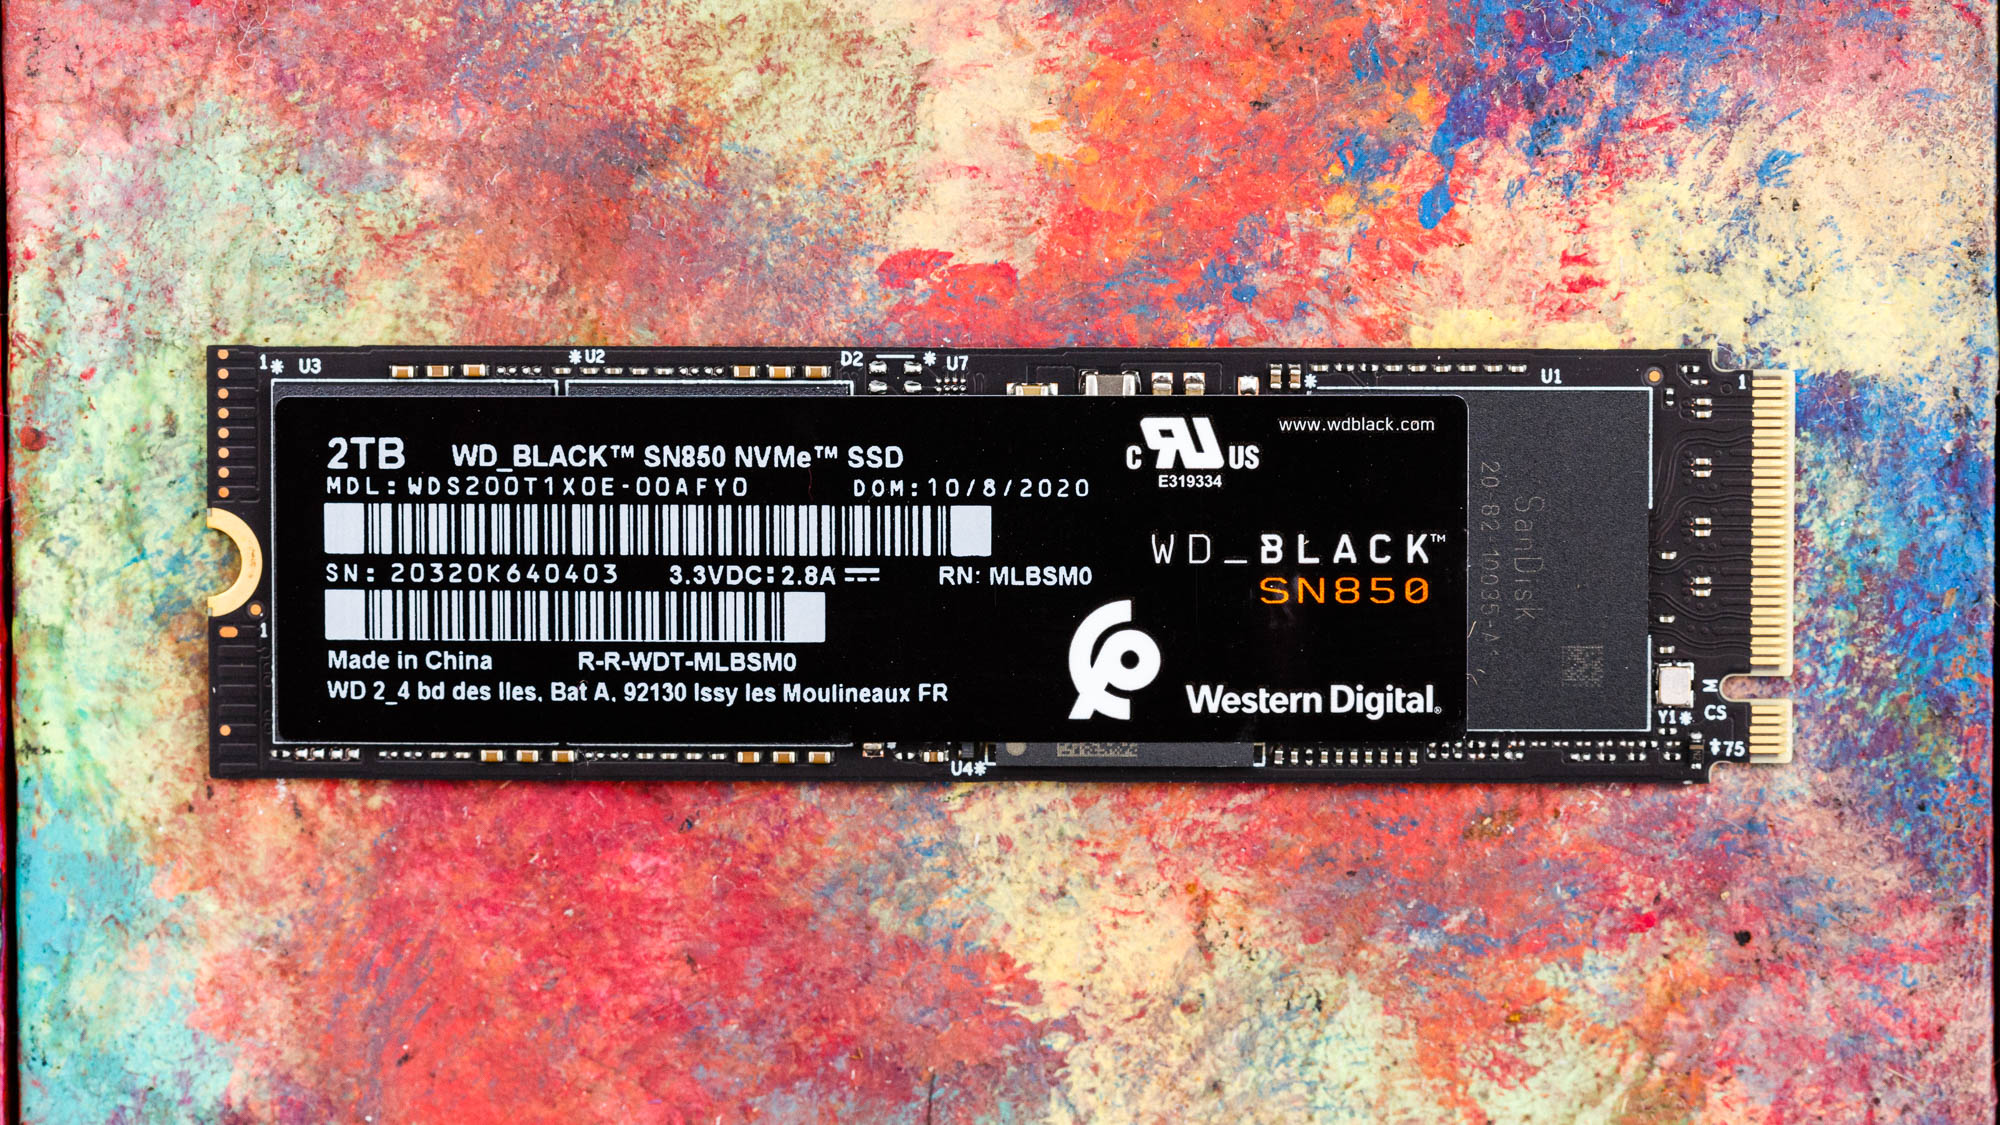 2tb Performance Results Wd Black Sn850 M 2 Nvme Ssd Review Top Tier Storage For Gamers And Pros Updated Tom S Hardware